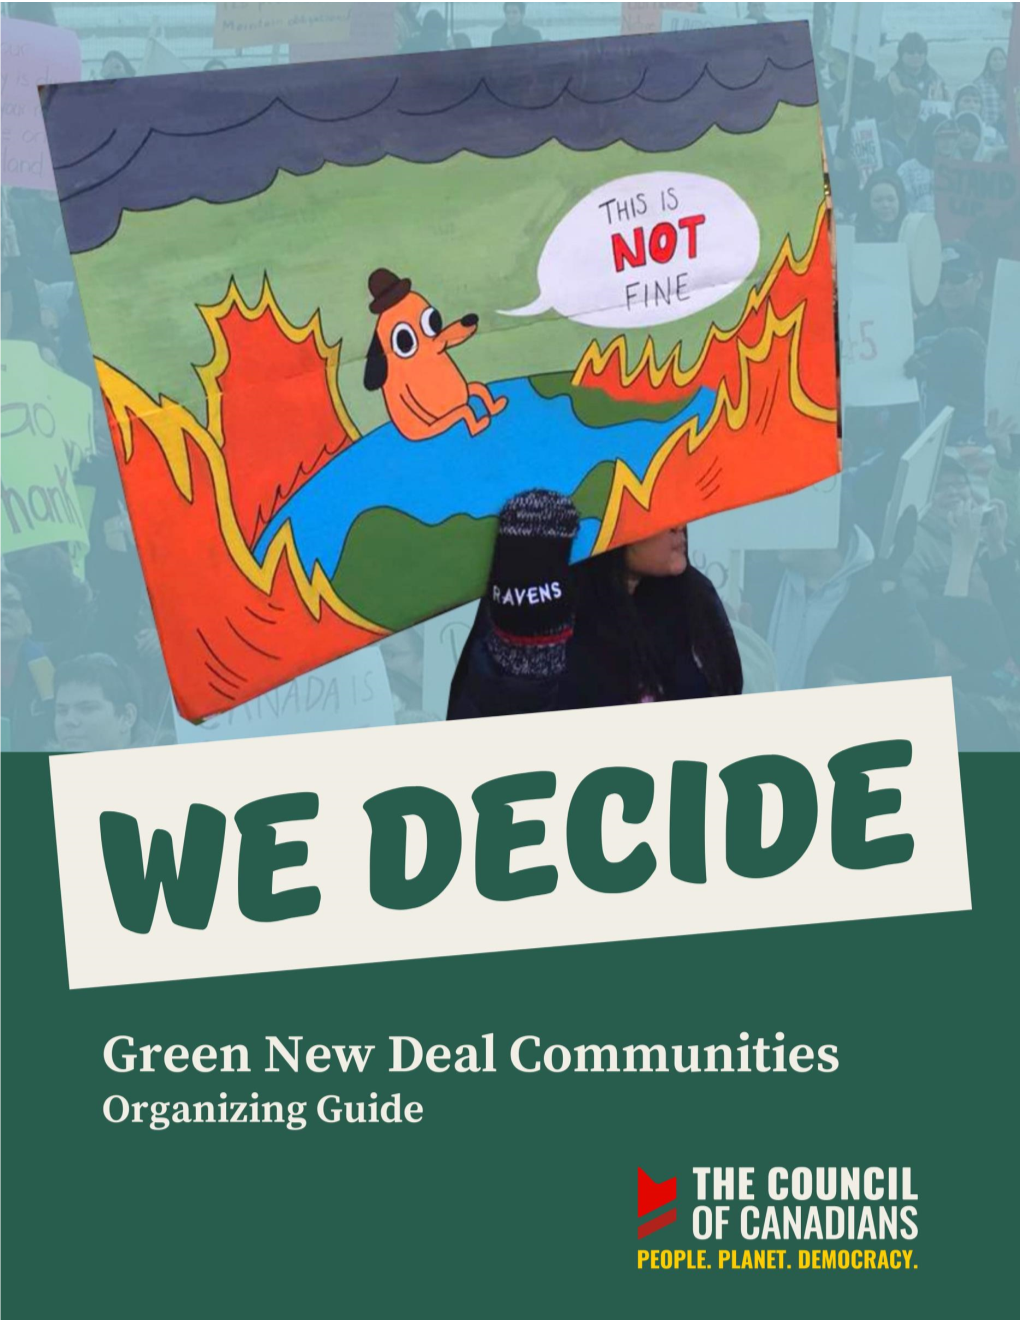 Green New Deal Communities Organizing Guide Second Edition, March 3, 2021 Published by the Council of Canadians